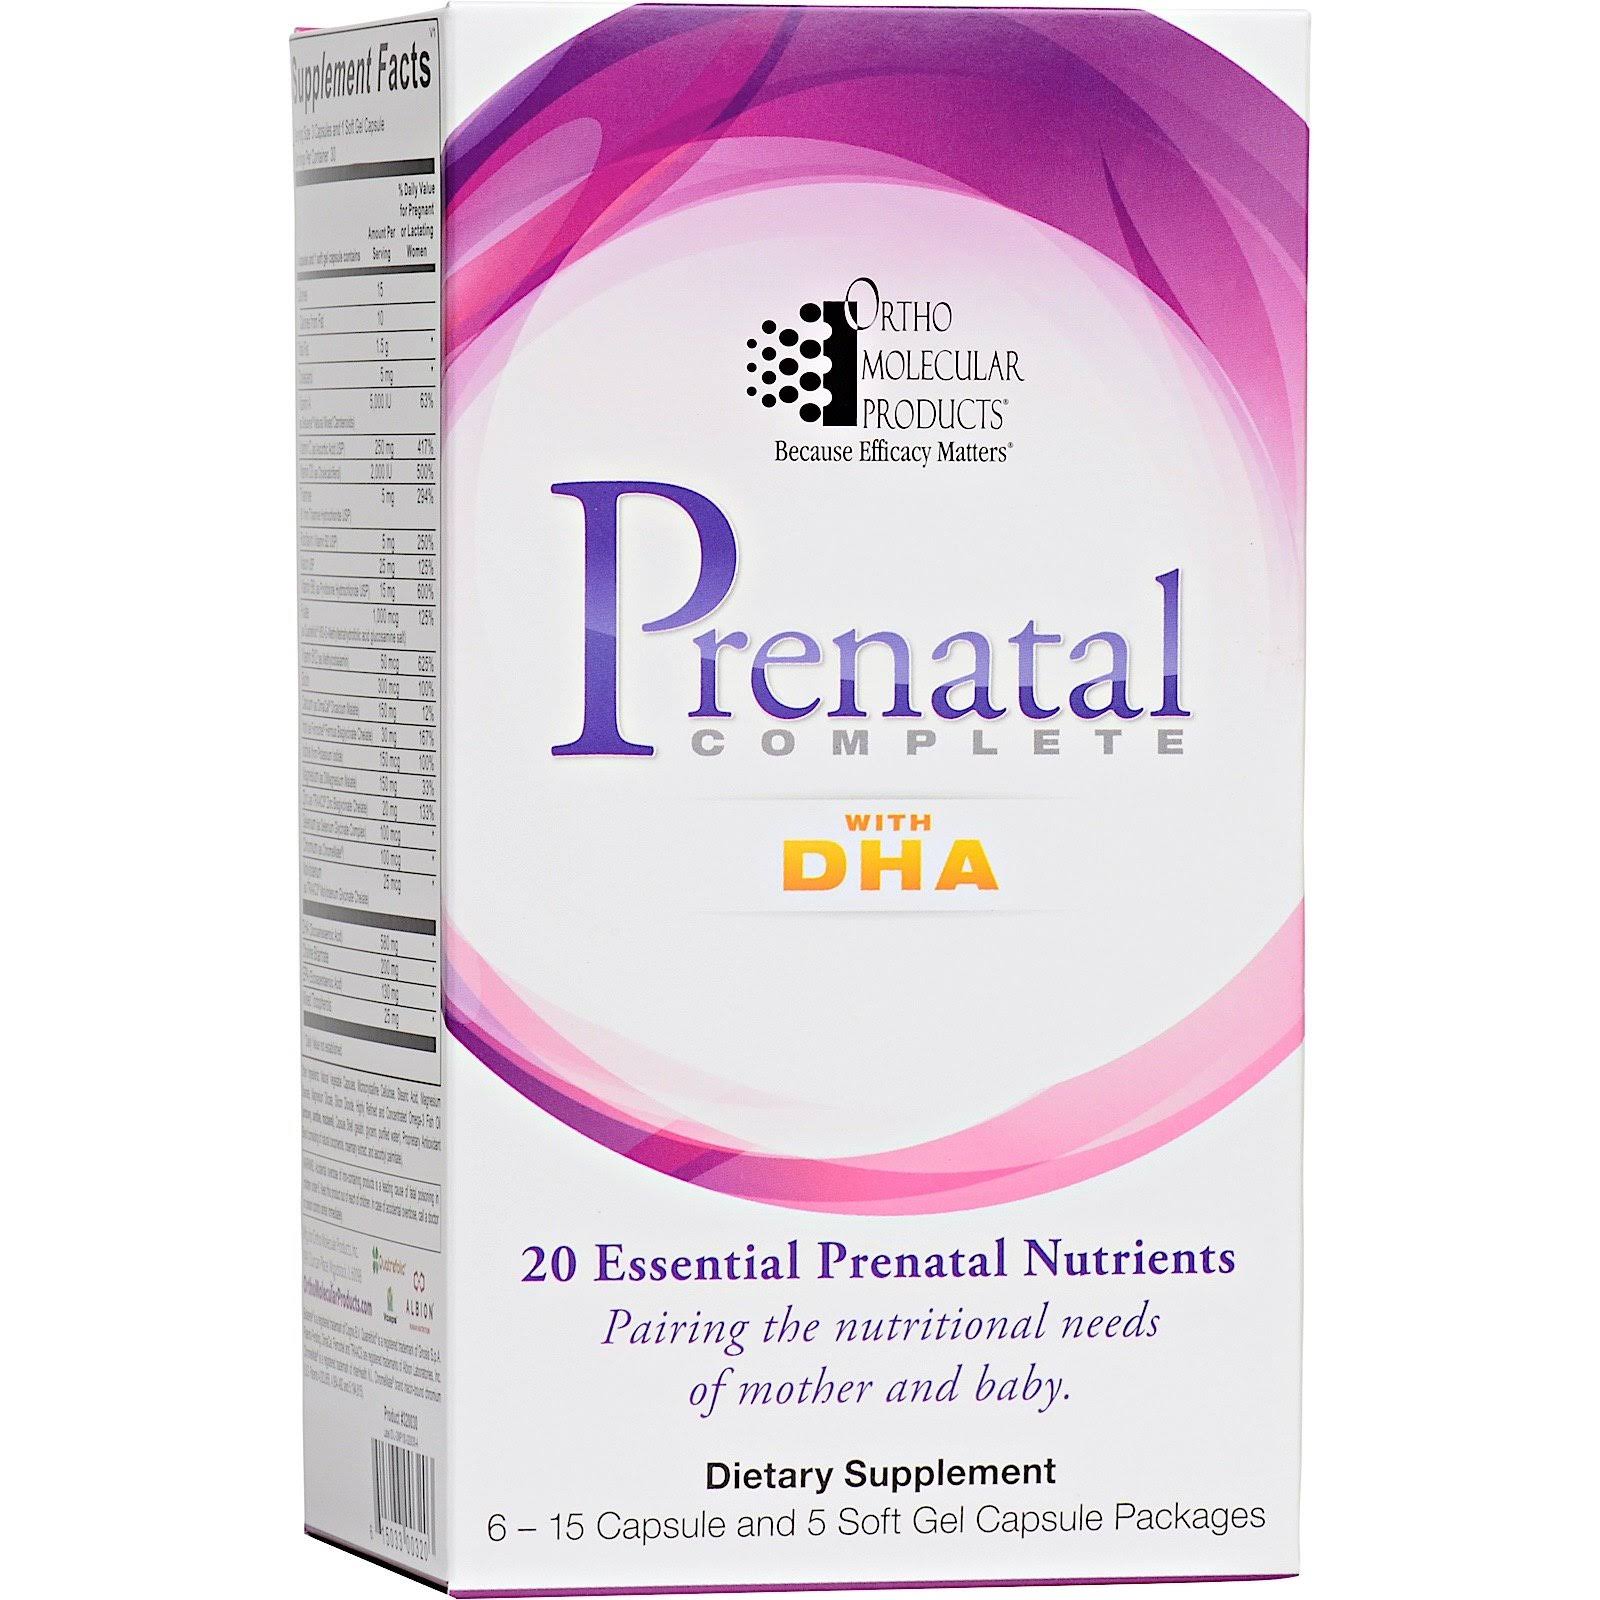 Ortho Molecular Prenatal Complete With Dha